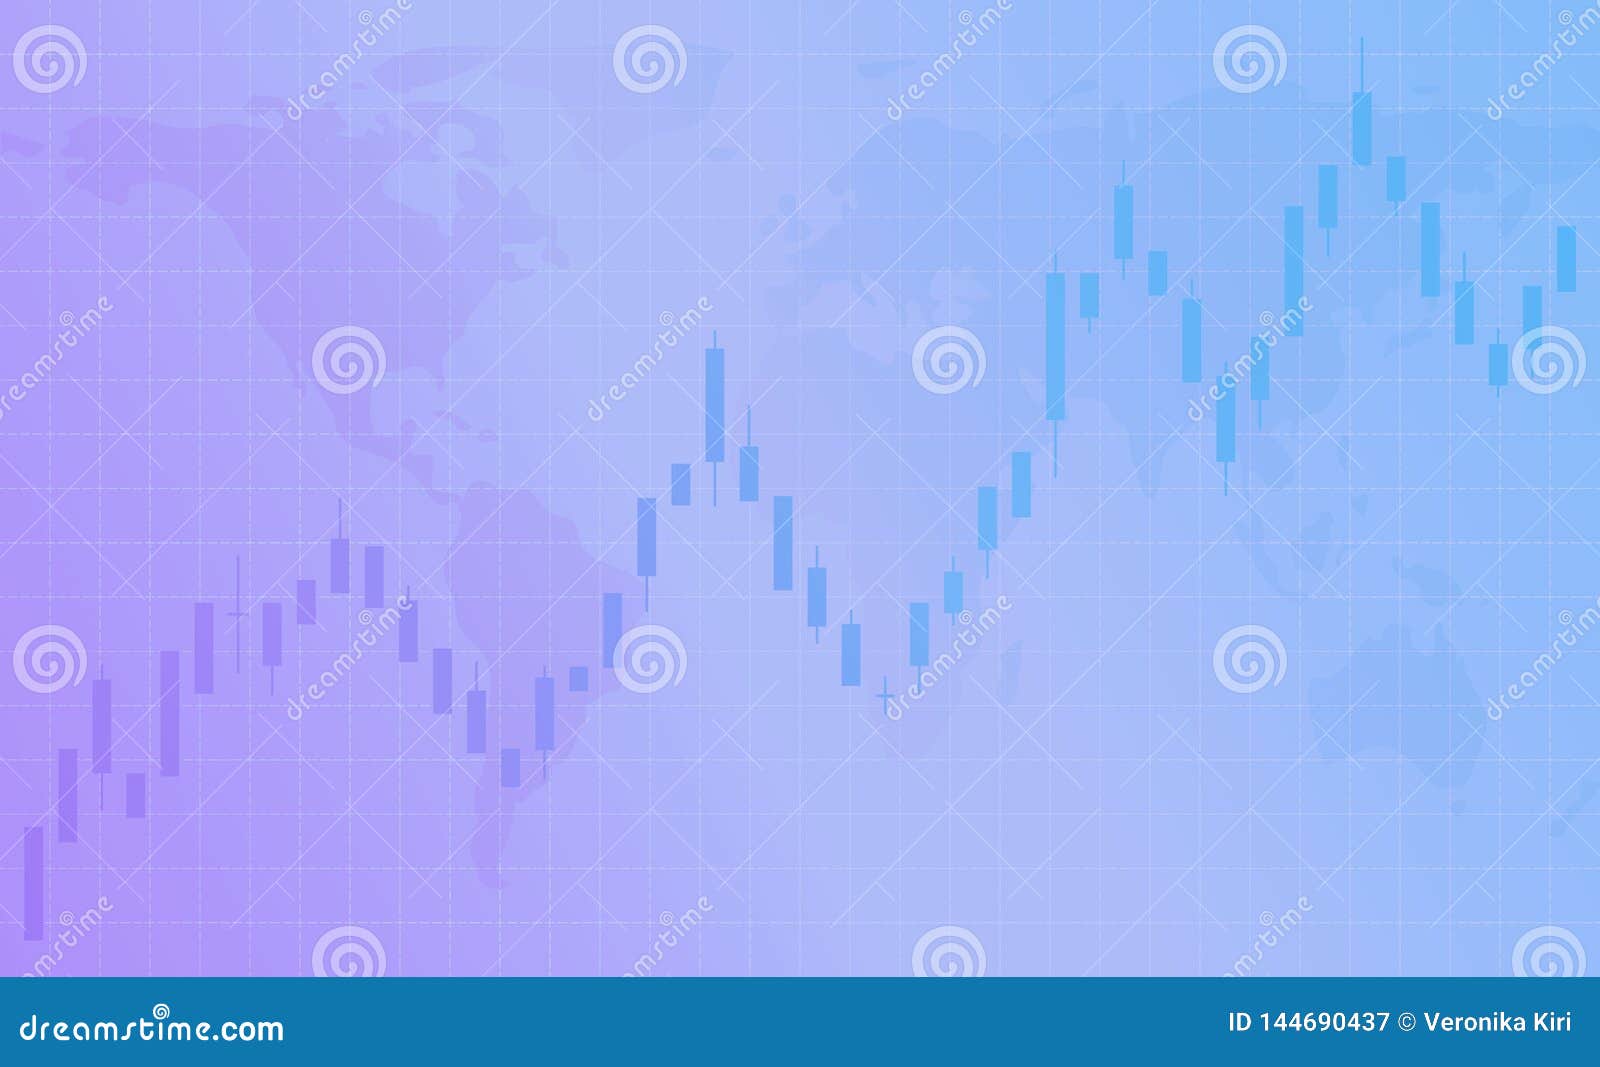 Chart Of Forex Candles Stock Market Purple Background With Grid - 